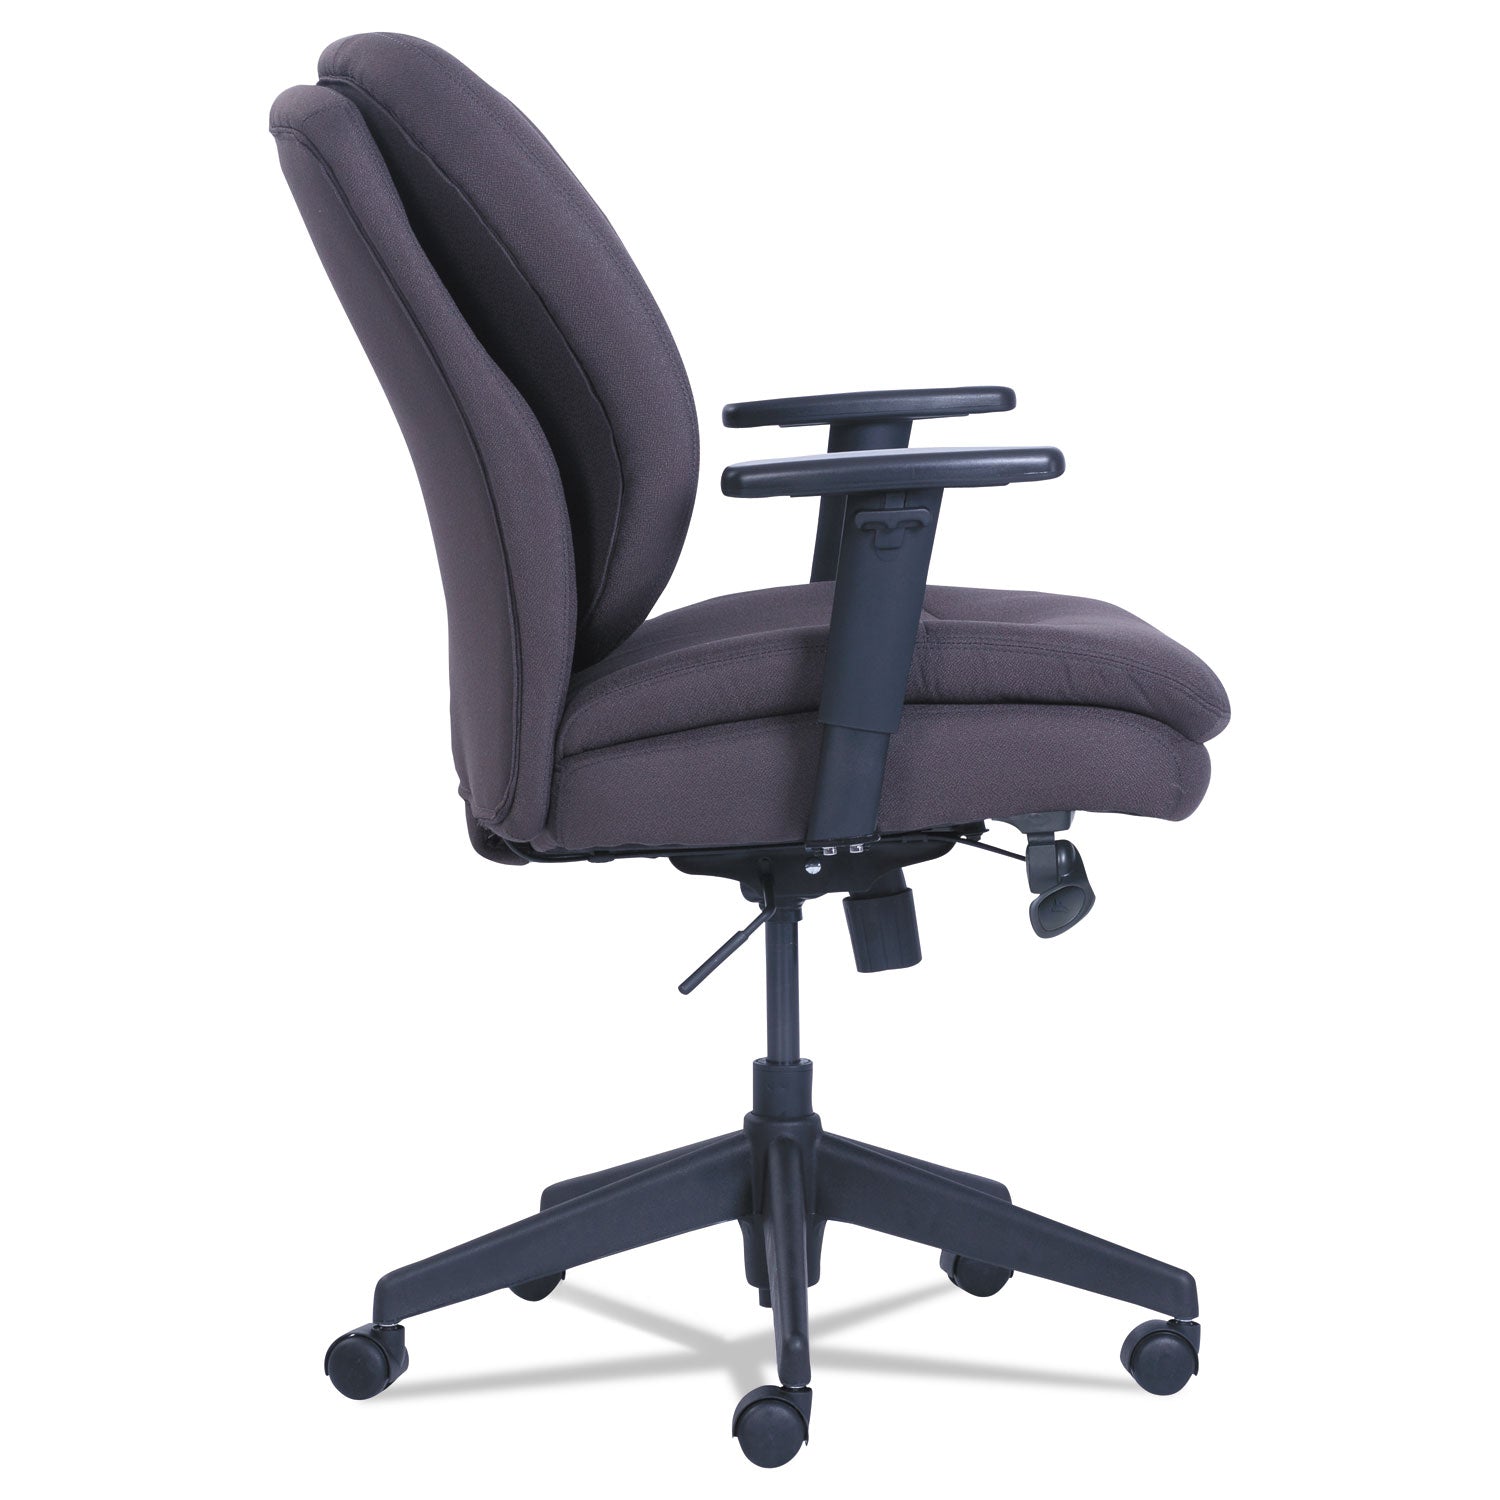 cosset-ergonomic-task-chair-supports-up-to-275-lb-195-to-225-seat-height-gray-seat-back-black-base_srj48967b - 5